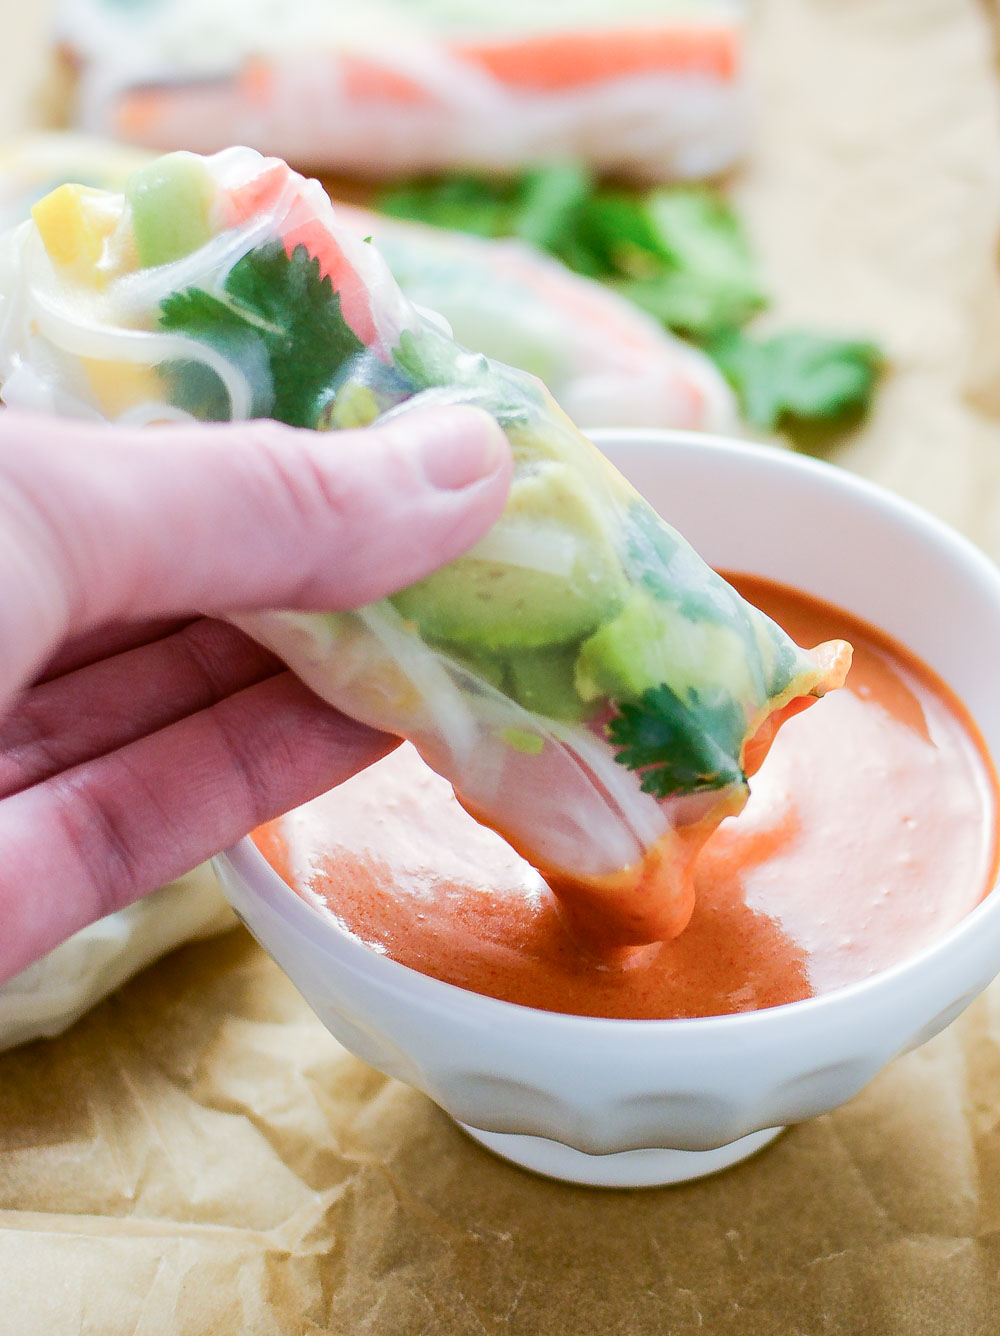 Tropical Crispy Chicken Summer Rolls are a bright and cheerful spring or summer recipe!